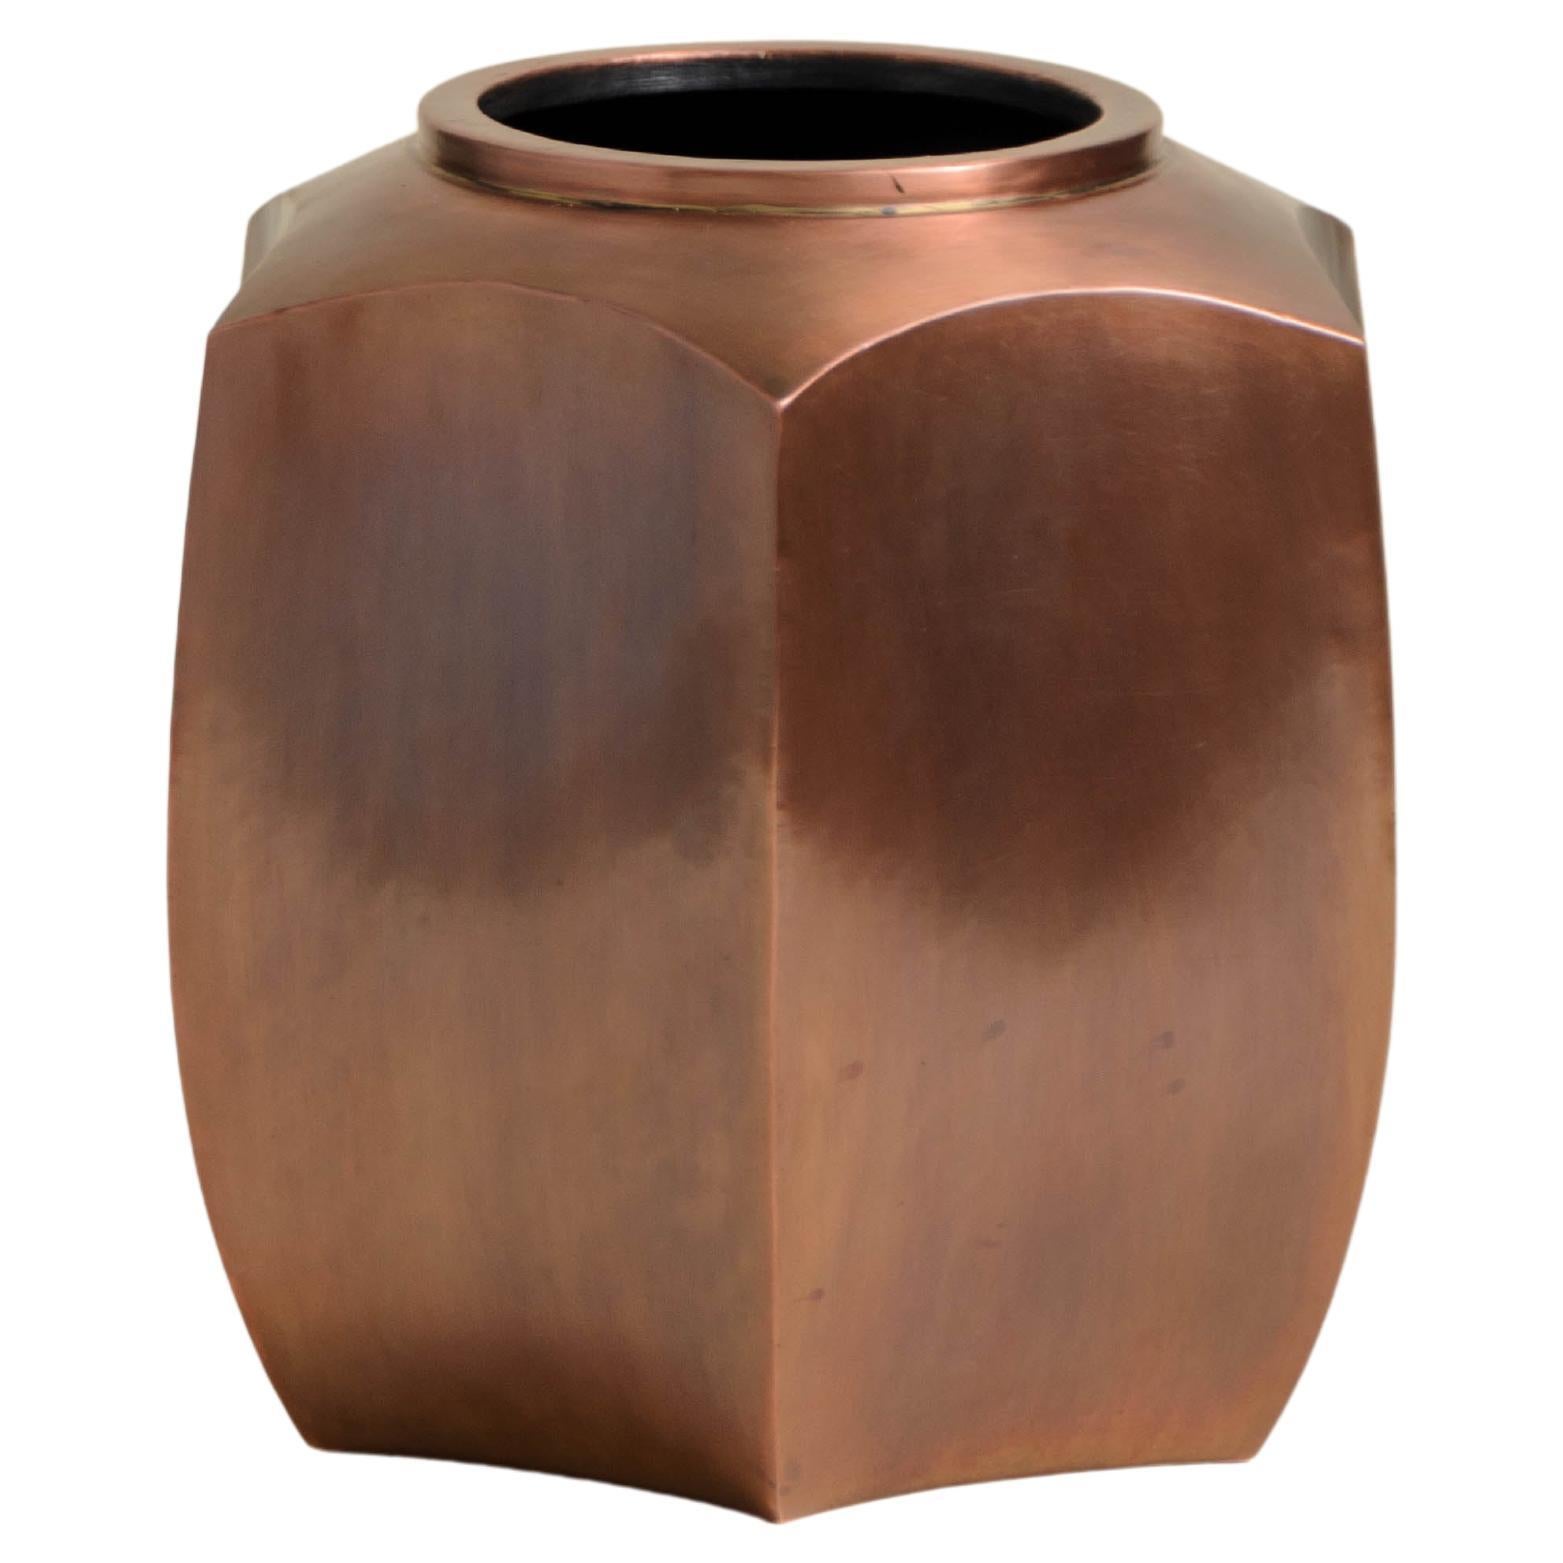 Contemporary Repoussé Hexagonal Short Jar in Antique Copper by Robert Kuo